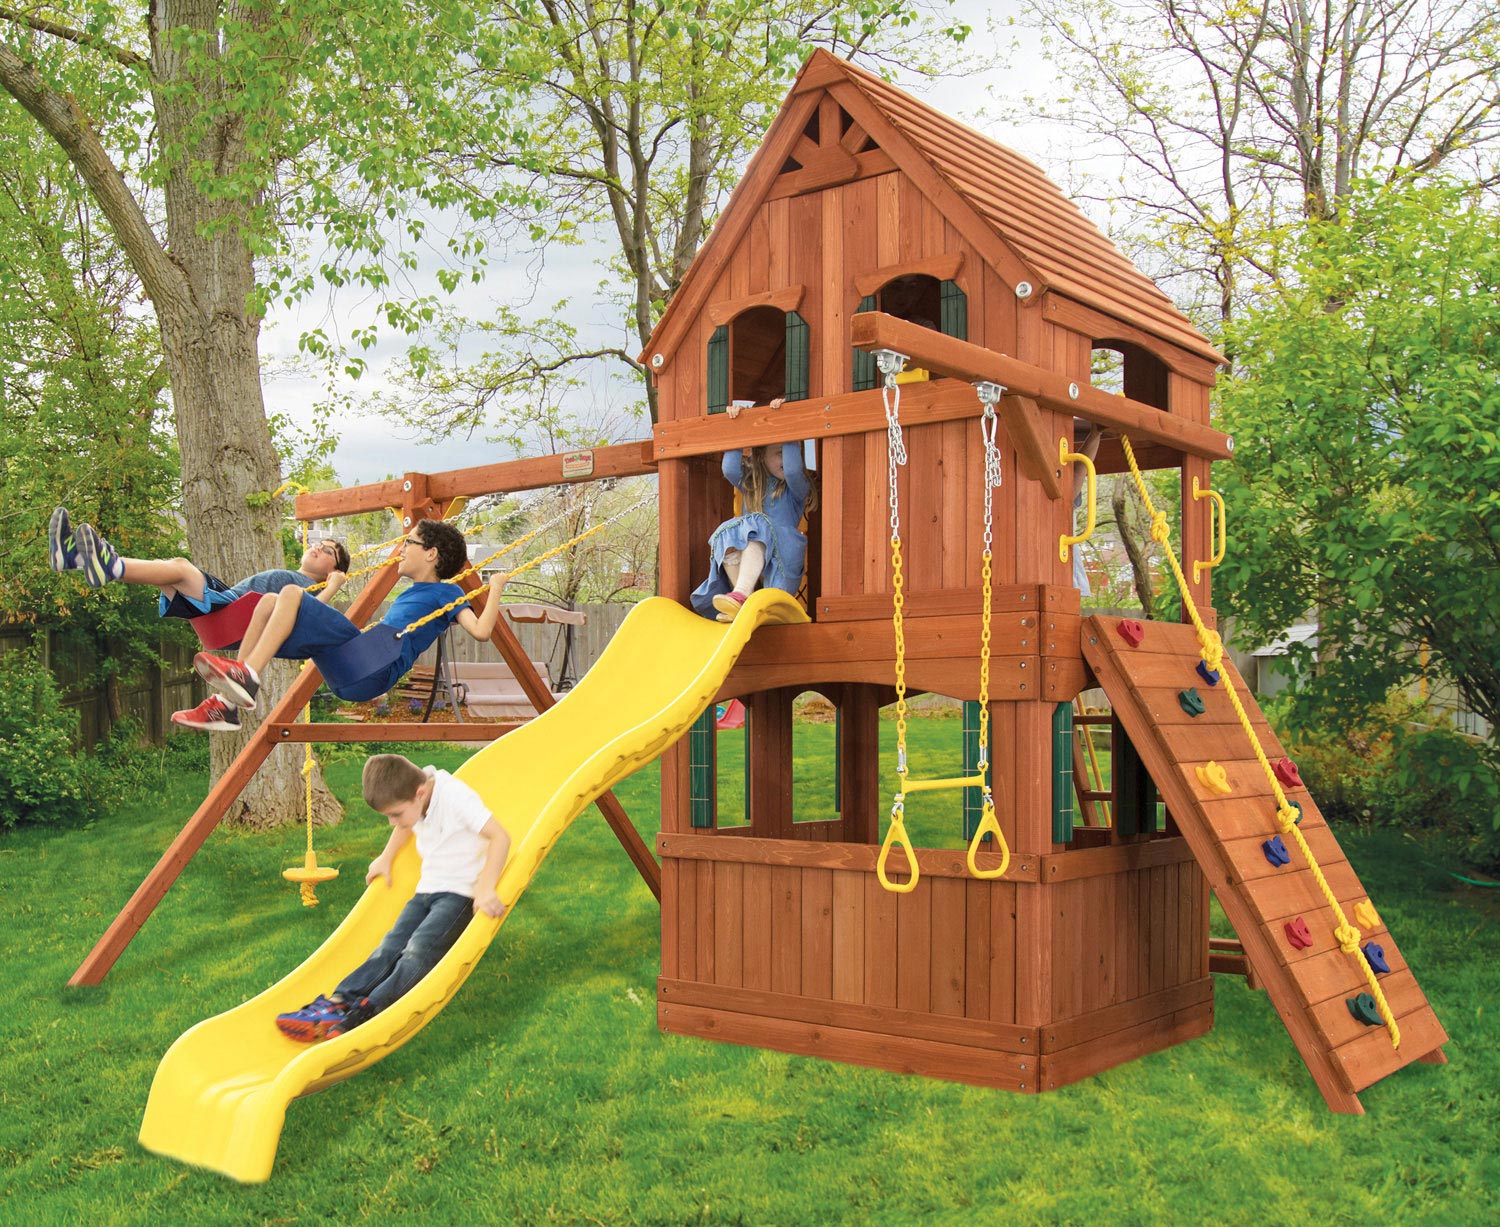 Parrot Island Fort w Wood Roof Treehouse  Panels Playhouse Panels and Yellow Wave Slide  